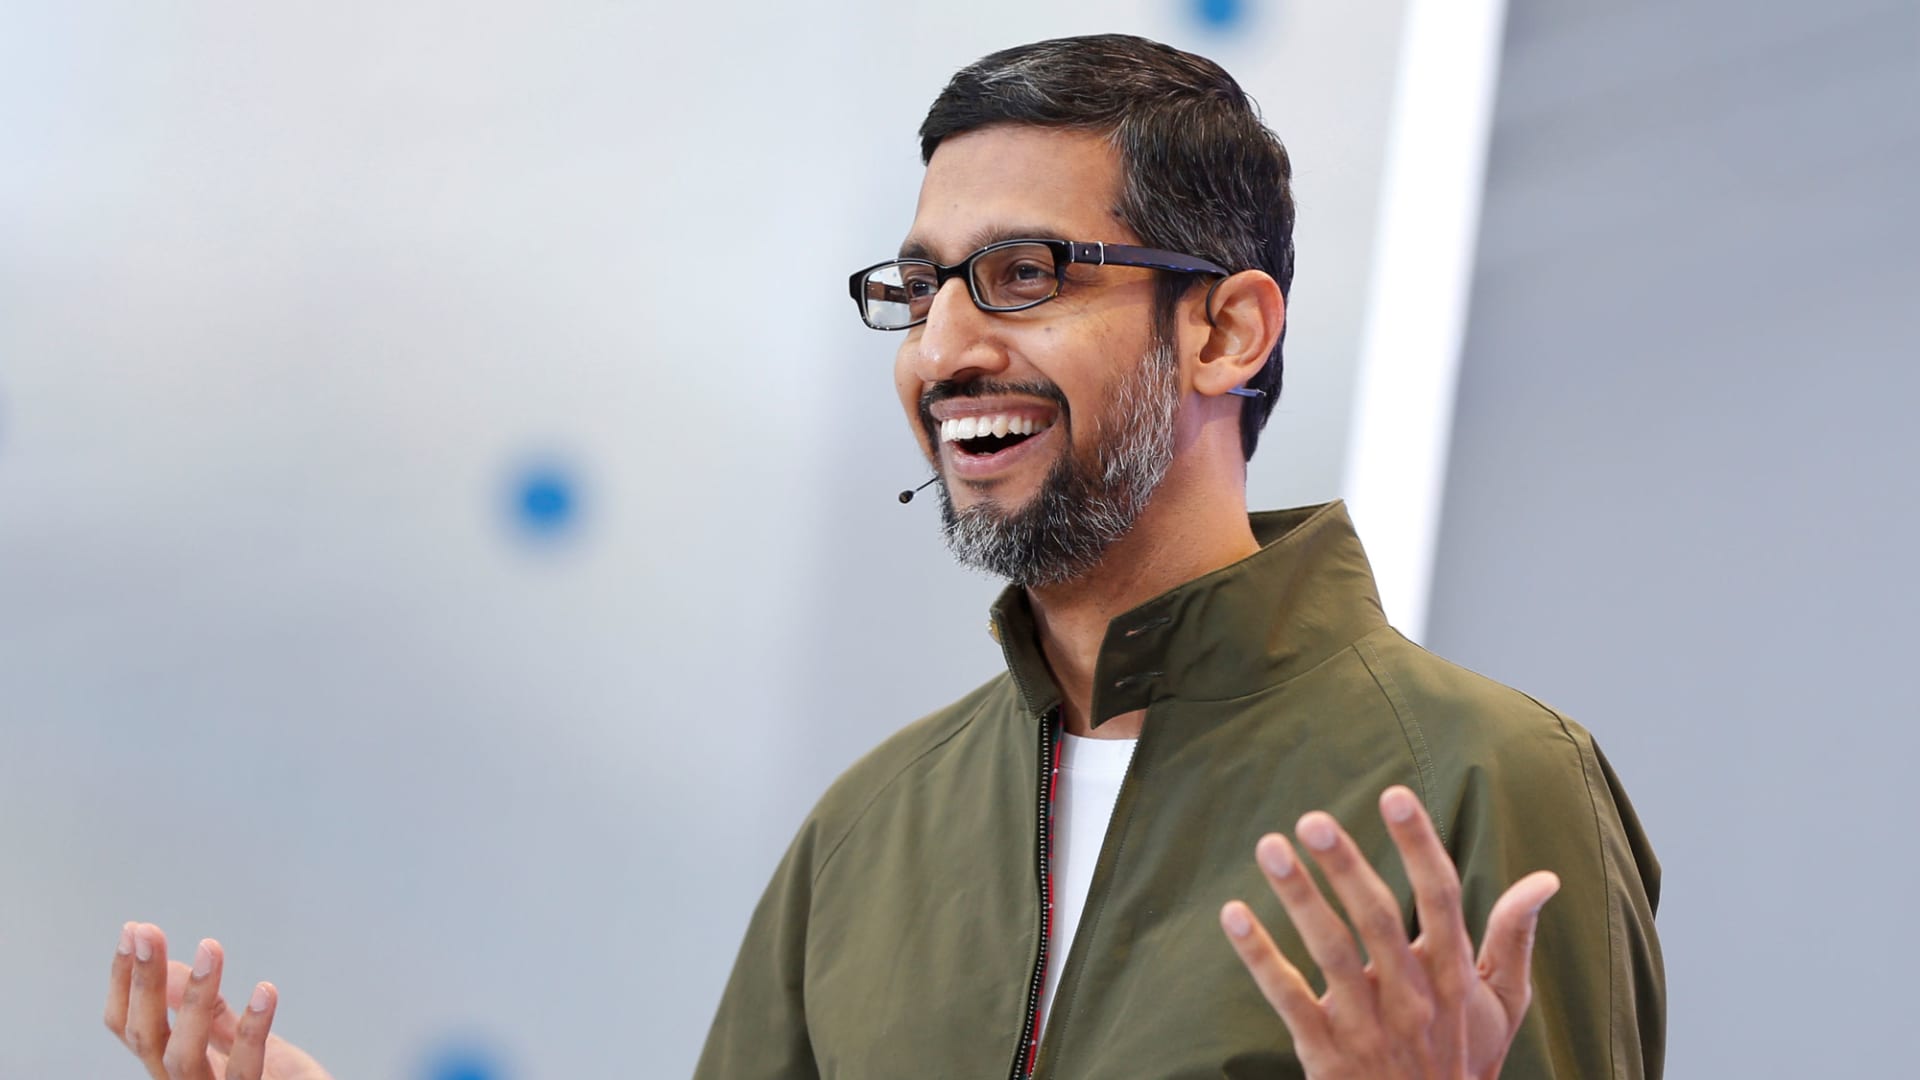 Google's cloud business turns profitable for the first time on record